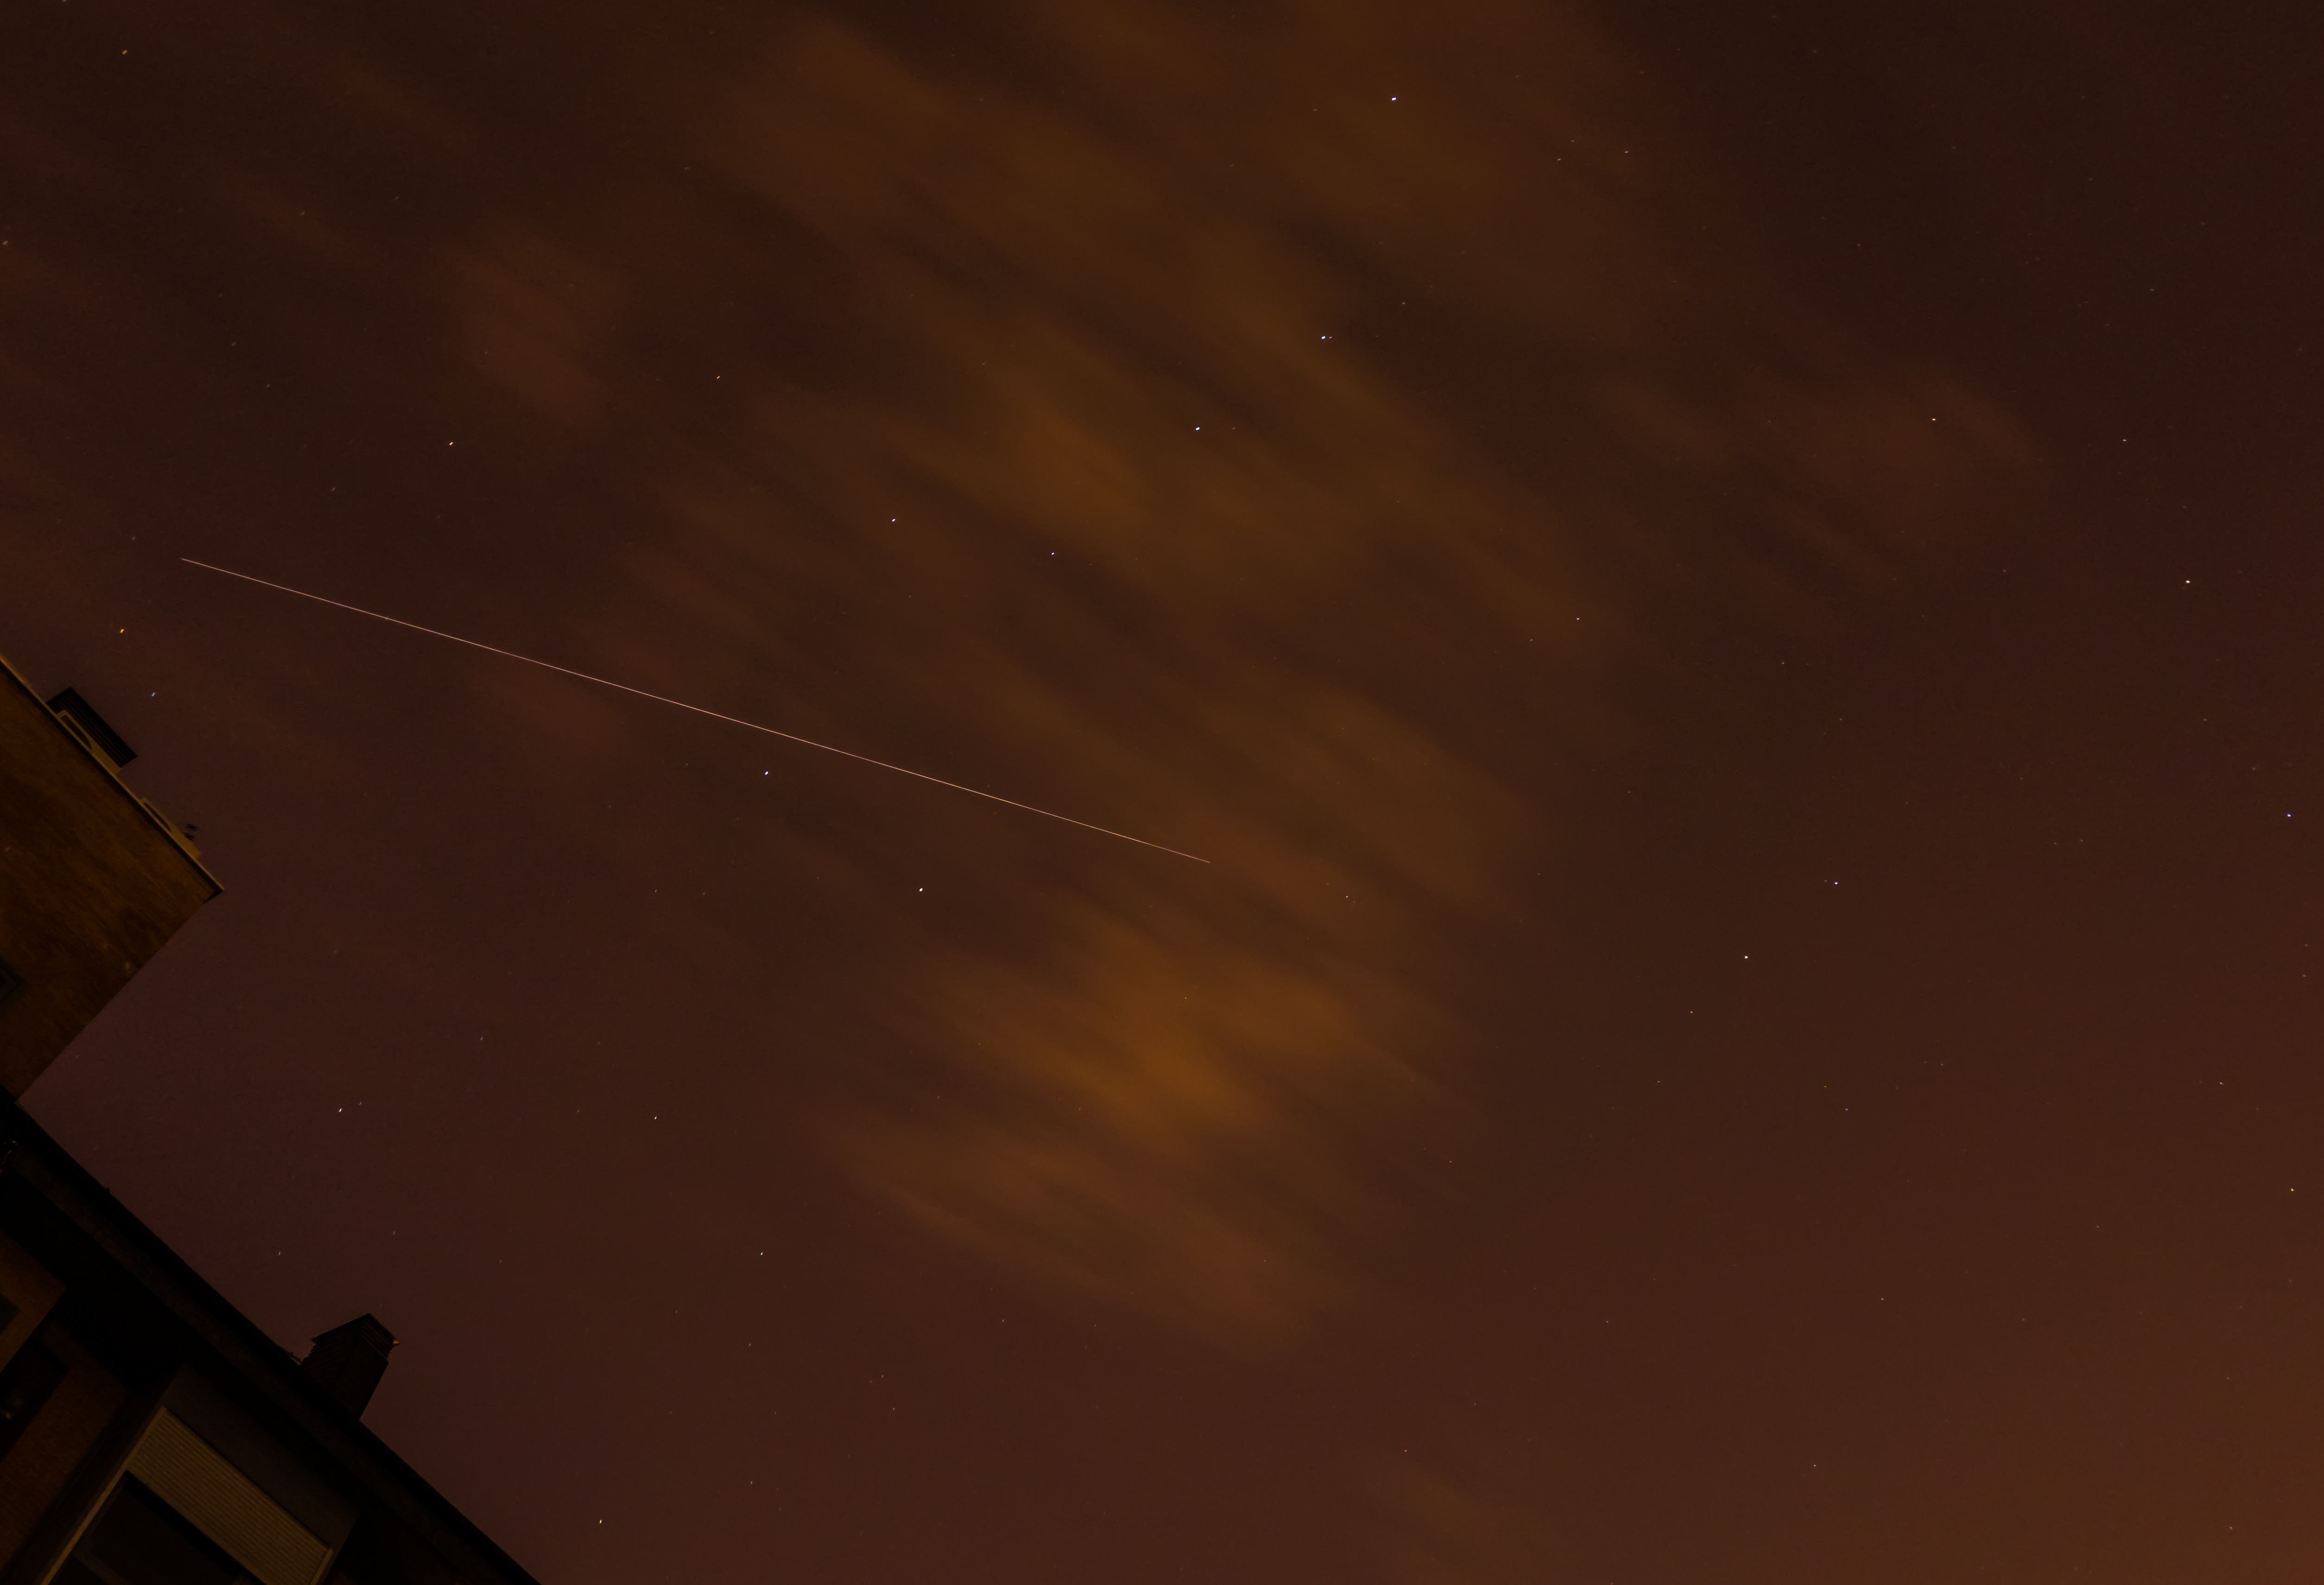 ISS pass over Madrid